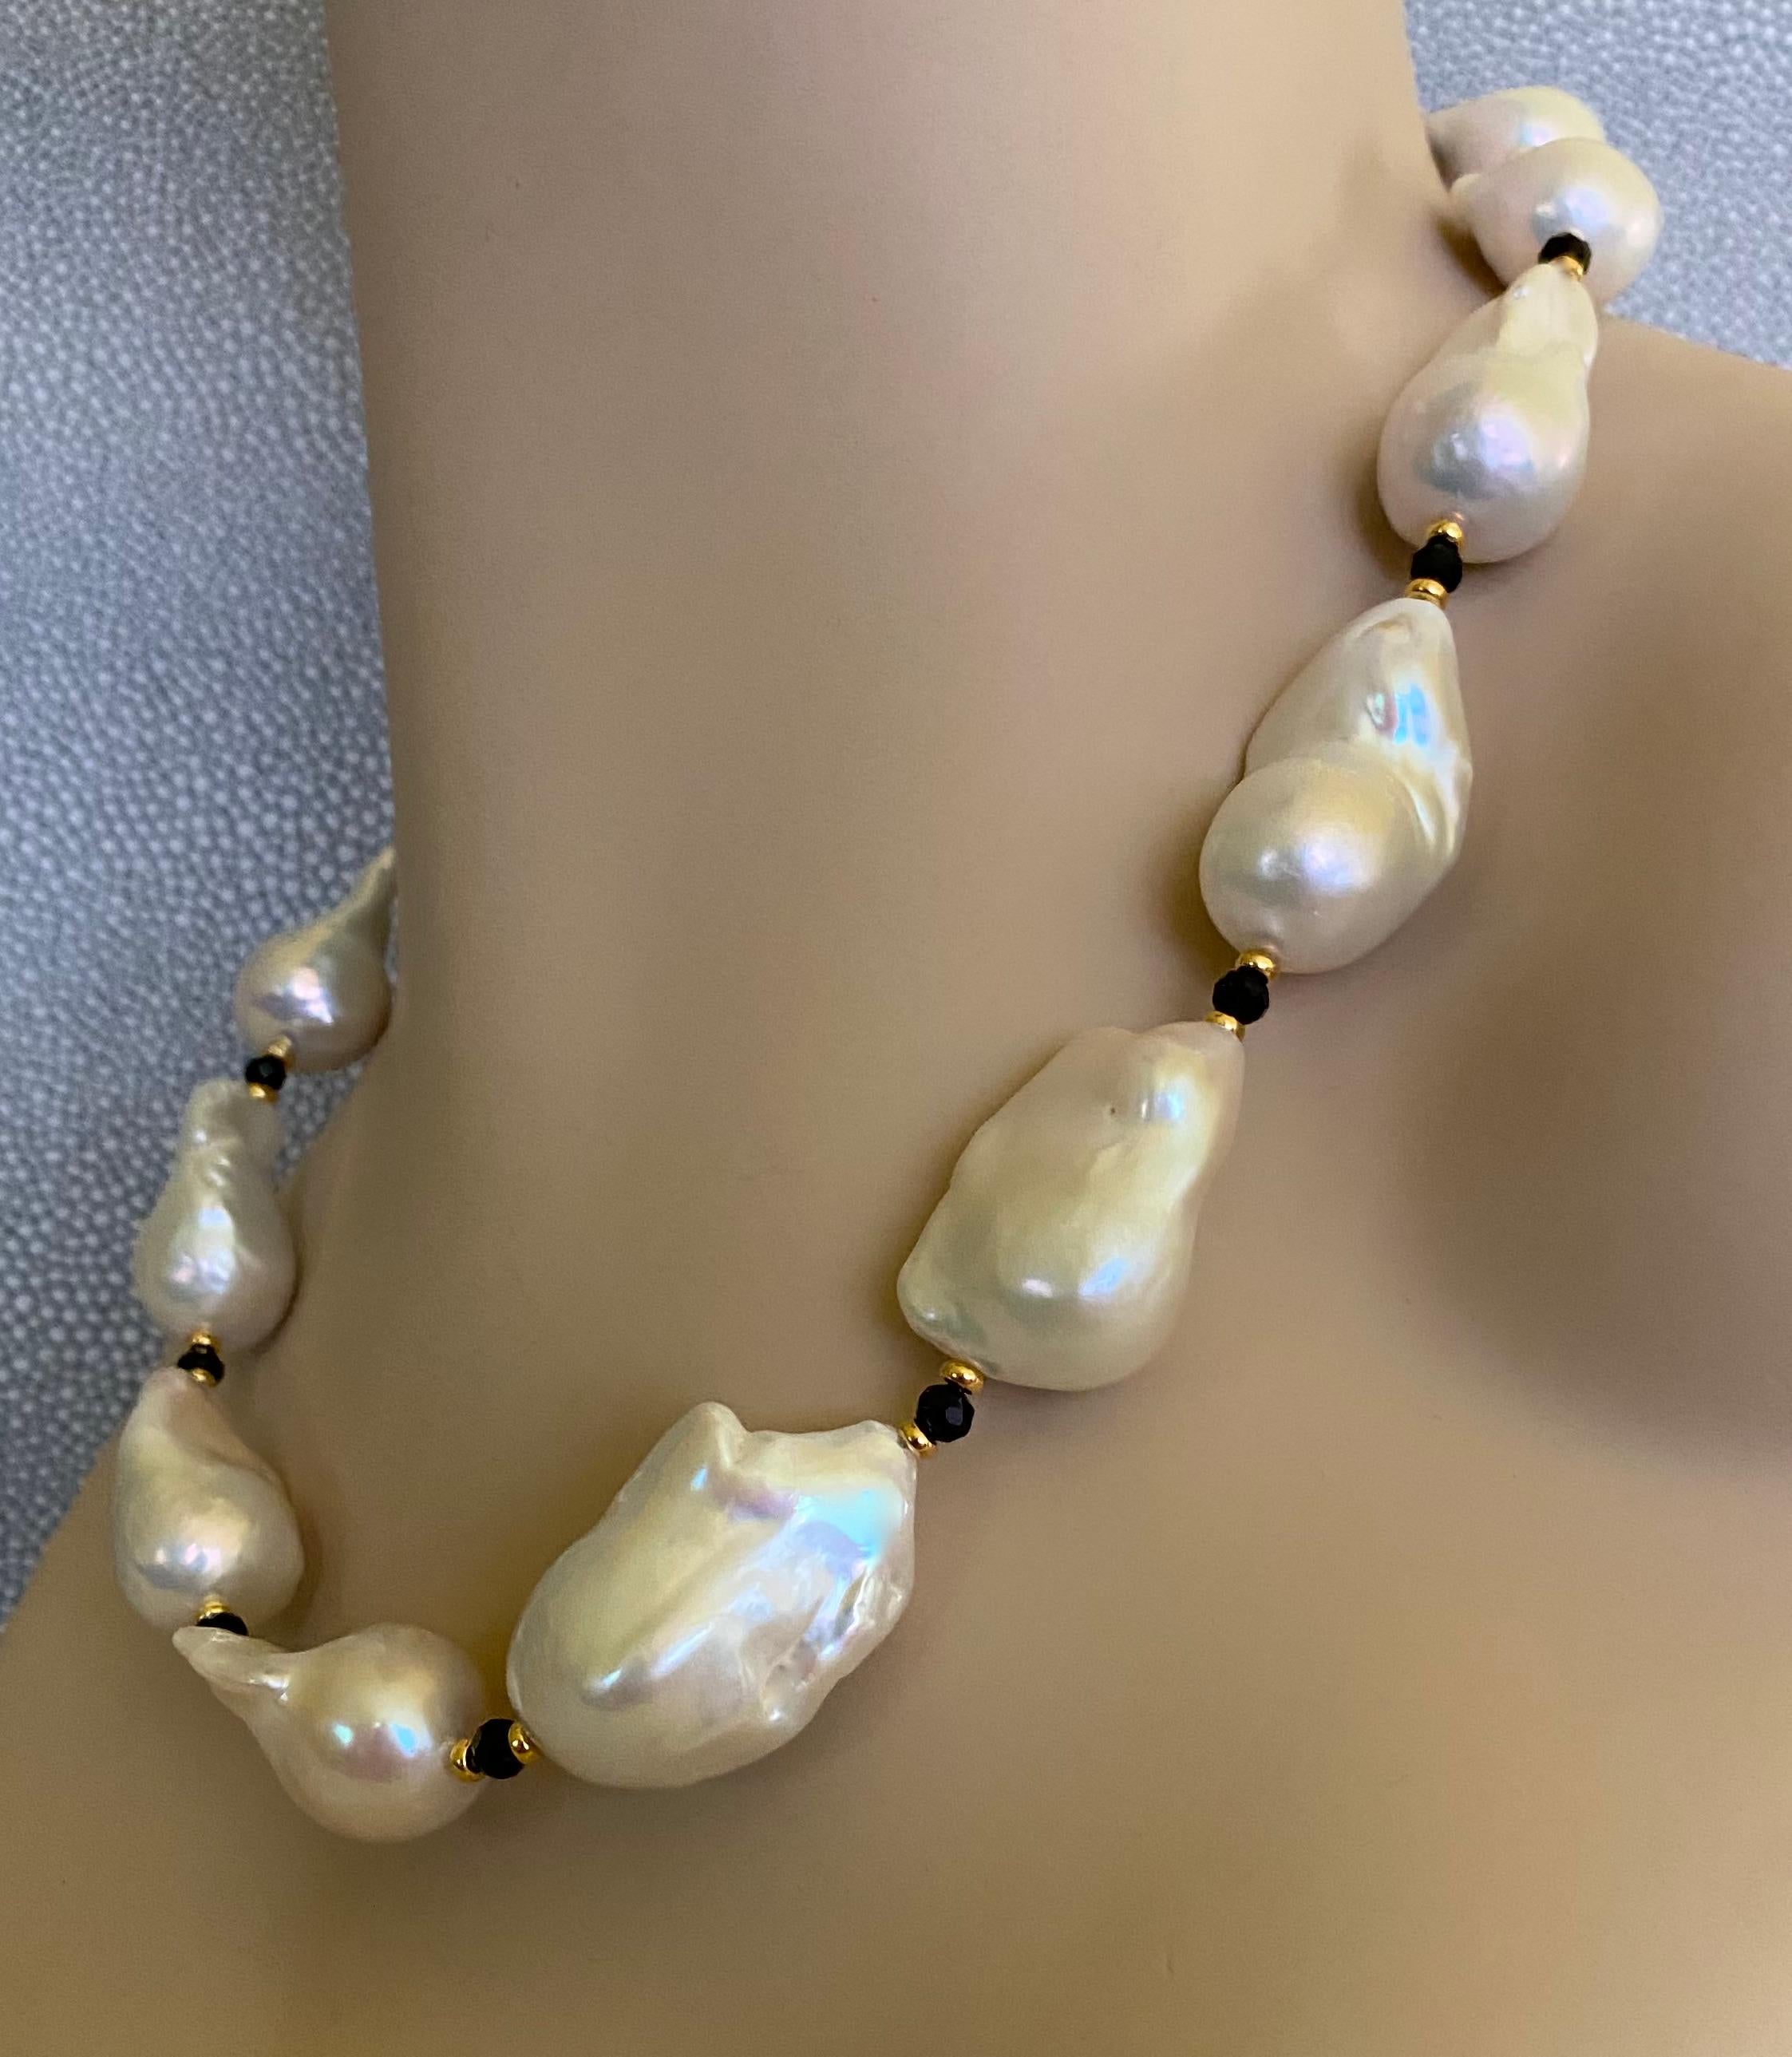 White baroque pearls are featured in this bold necklace.  The pearls are ginormous, the largest measures fully 1.38 inches in length.  The nacre possess great luster with no blemishes.  The pearls are spaced with small faceted black spinel and gold